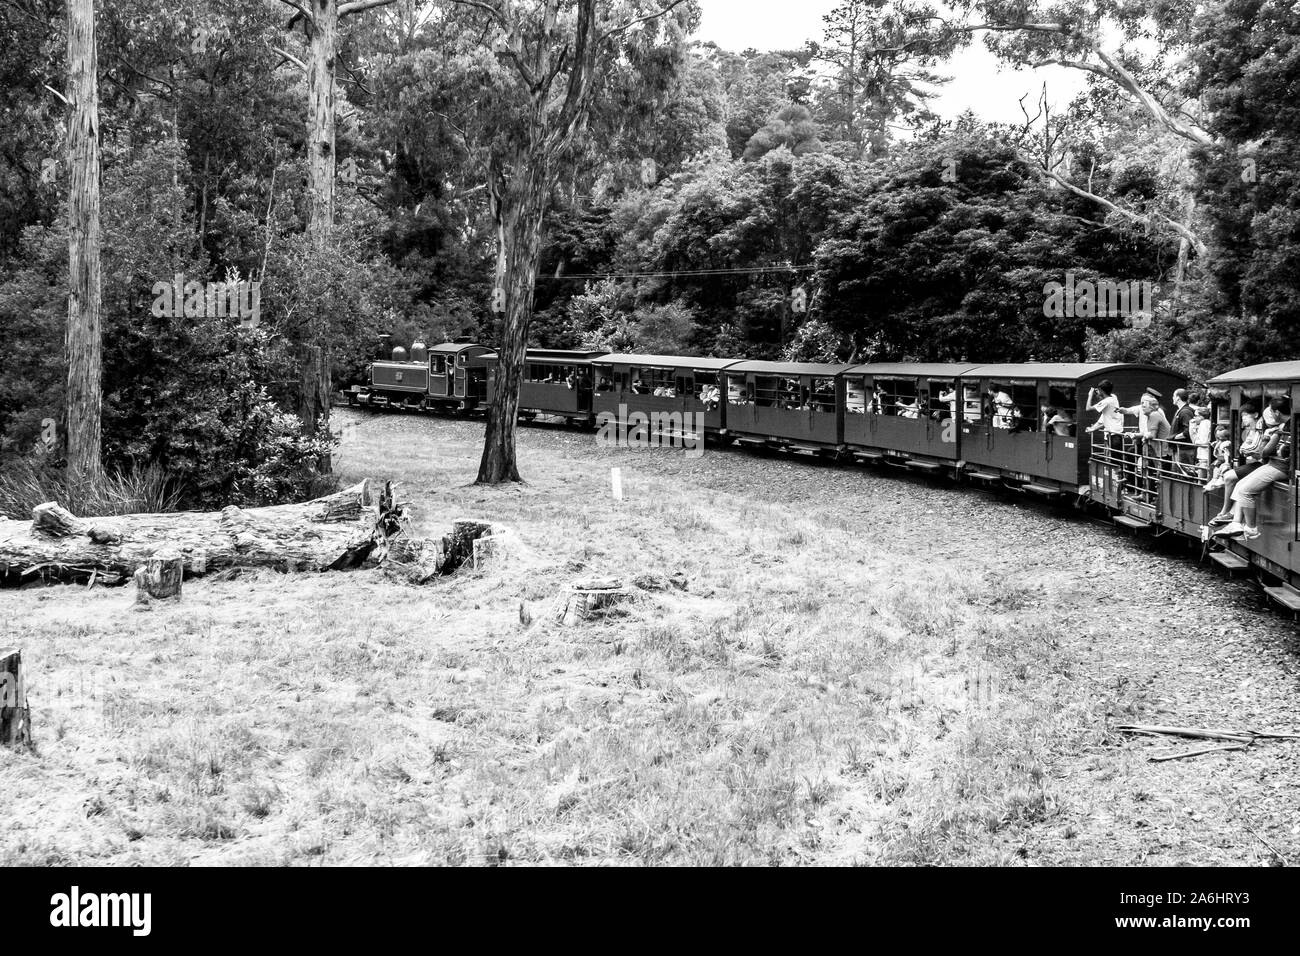 Melbourne, Australia - January 7, 2009: Puffing Billy steam train with passengers. Historical narrow railway in the Dandenong Ranges near Melbourne. Stock Photo